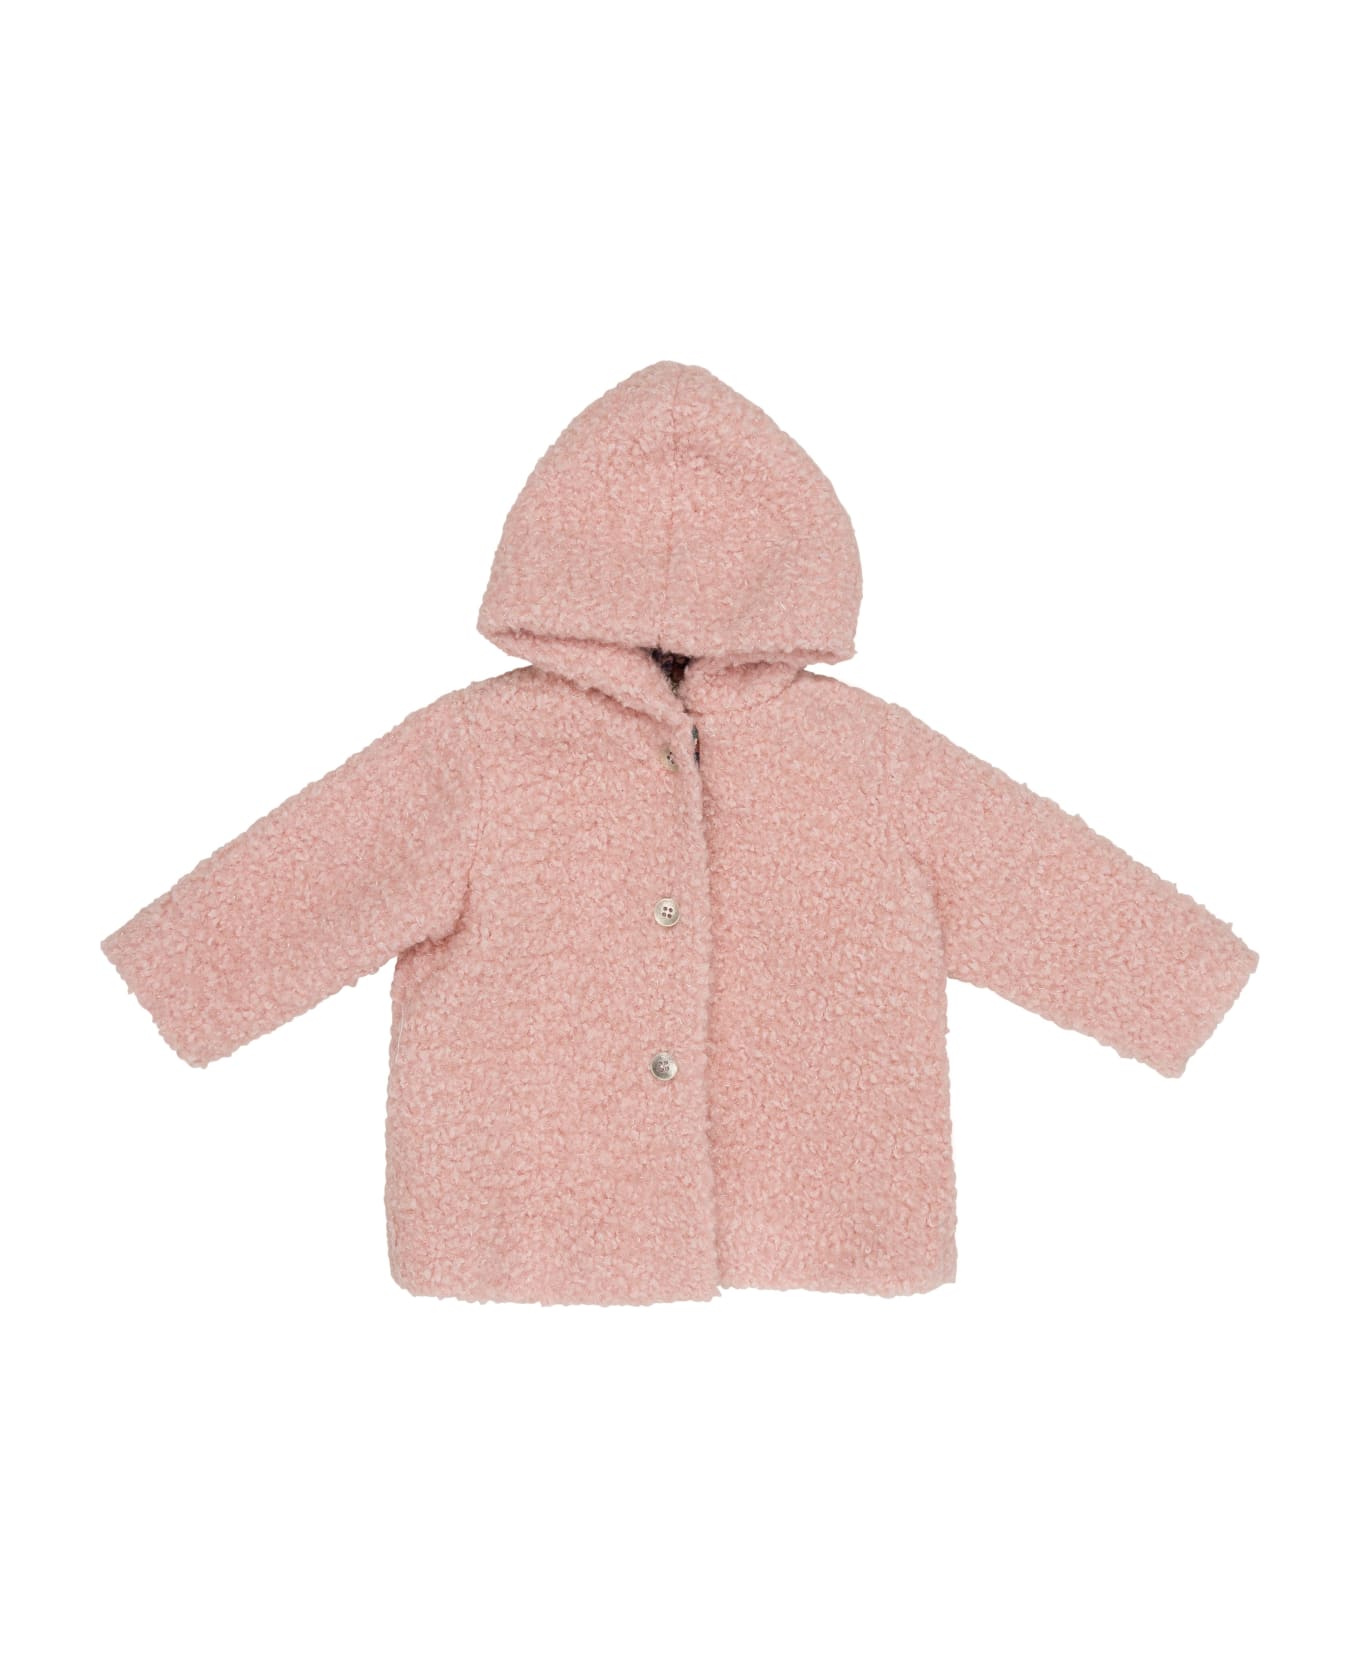 Caffe' d'Orzo Coat With Hood - Pink